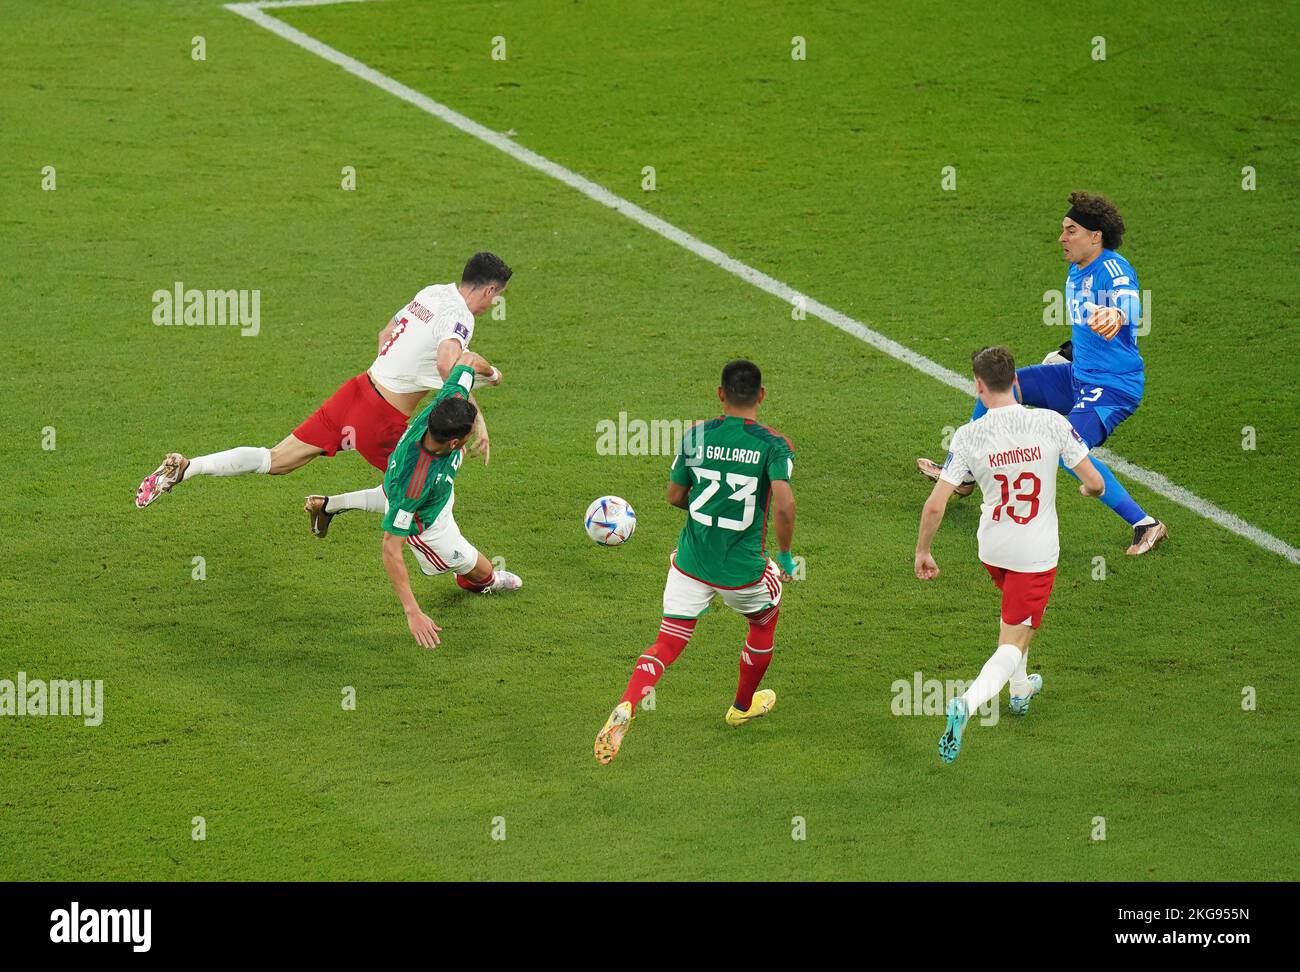 Mexico's Hector Moreno fouls Poland's Robert Lewandowski, resulting in a penalty during the FIFA World Cup Group C match at Stadium 974, Rass Abou Aboud. Picture date: Tuesday November 22, 2022. Stock Photo